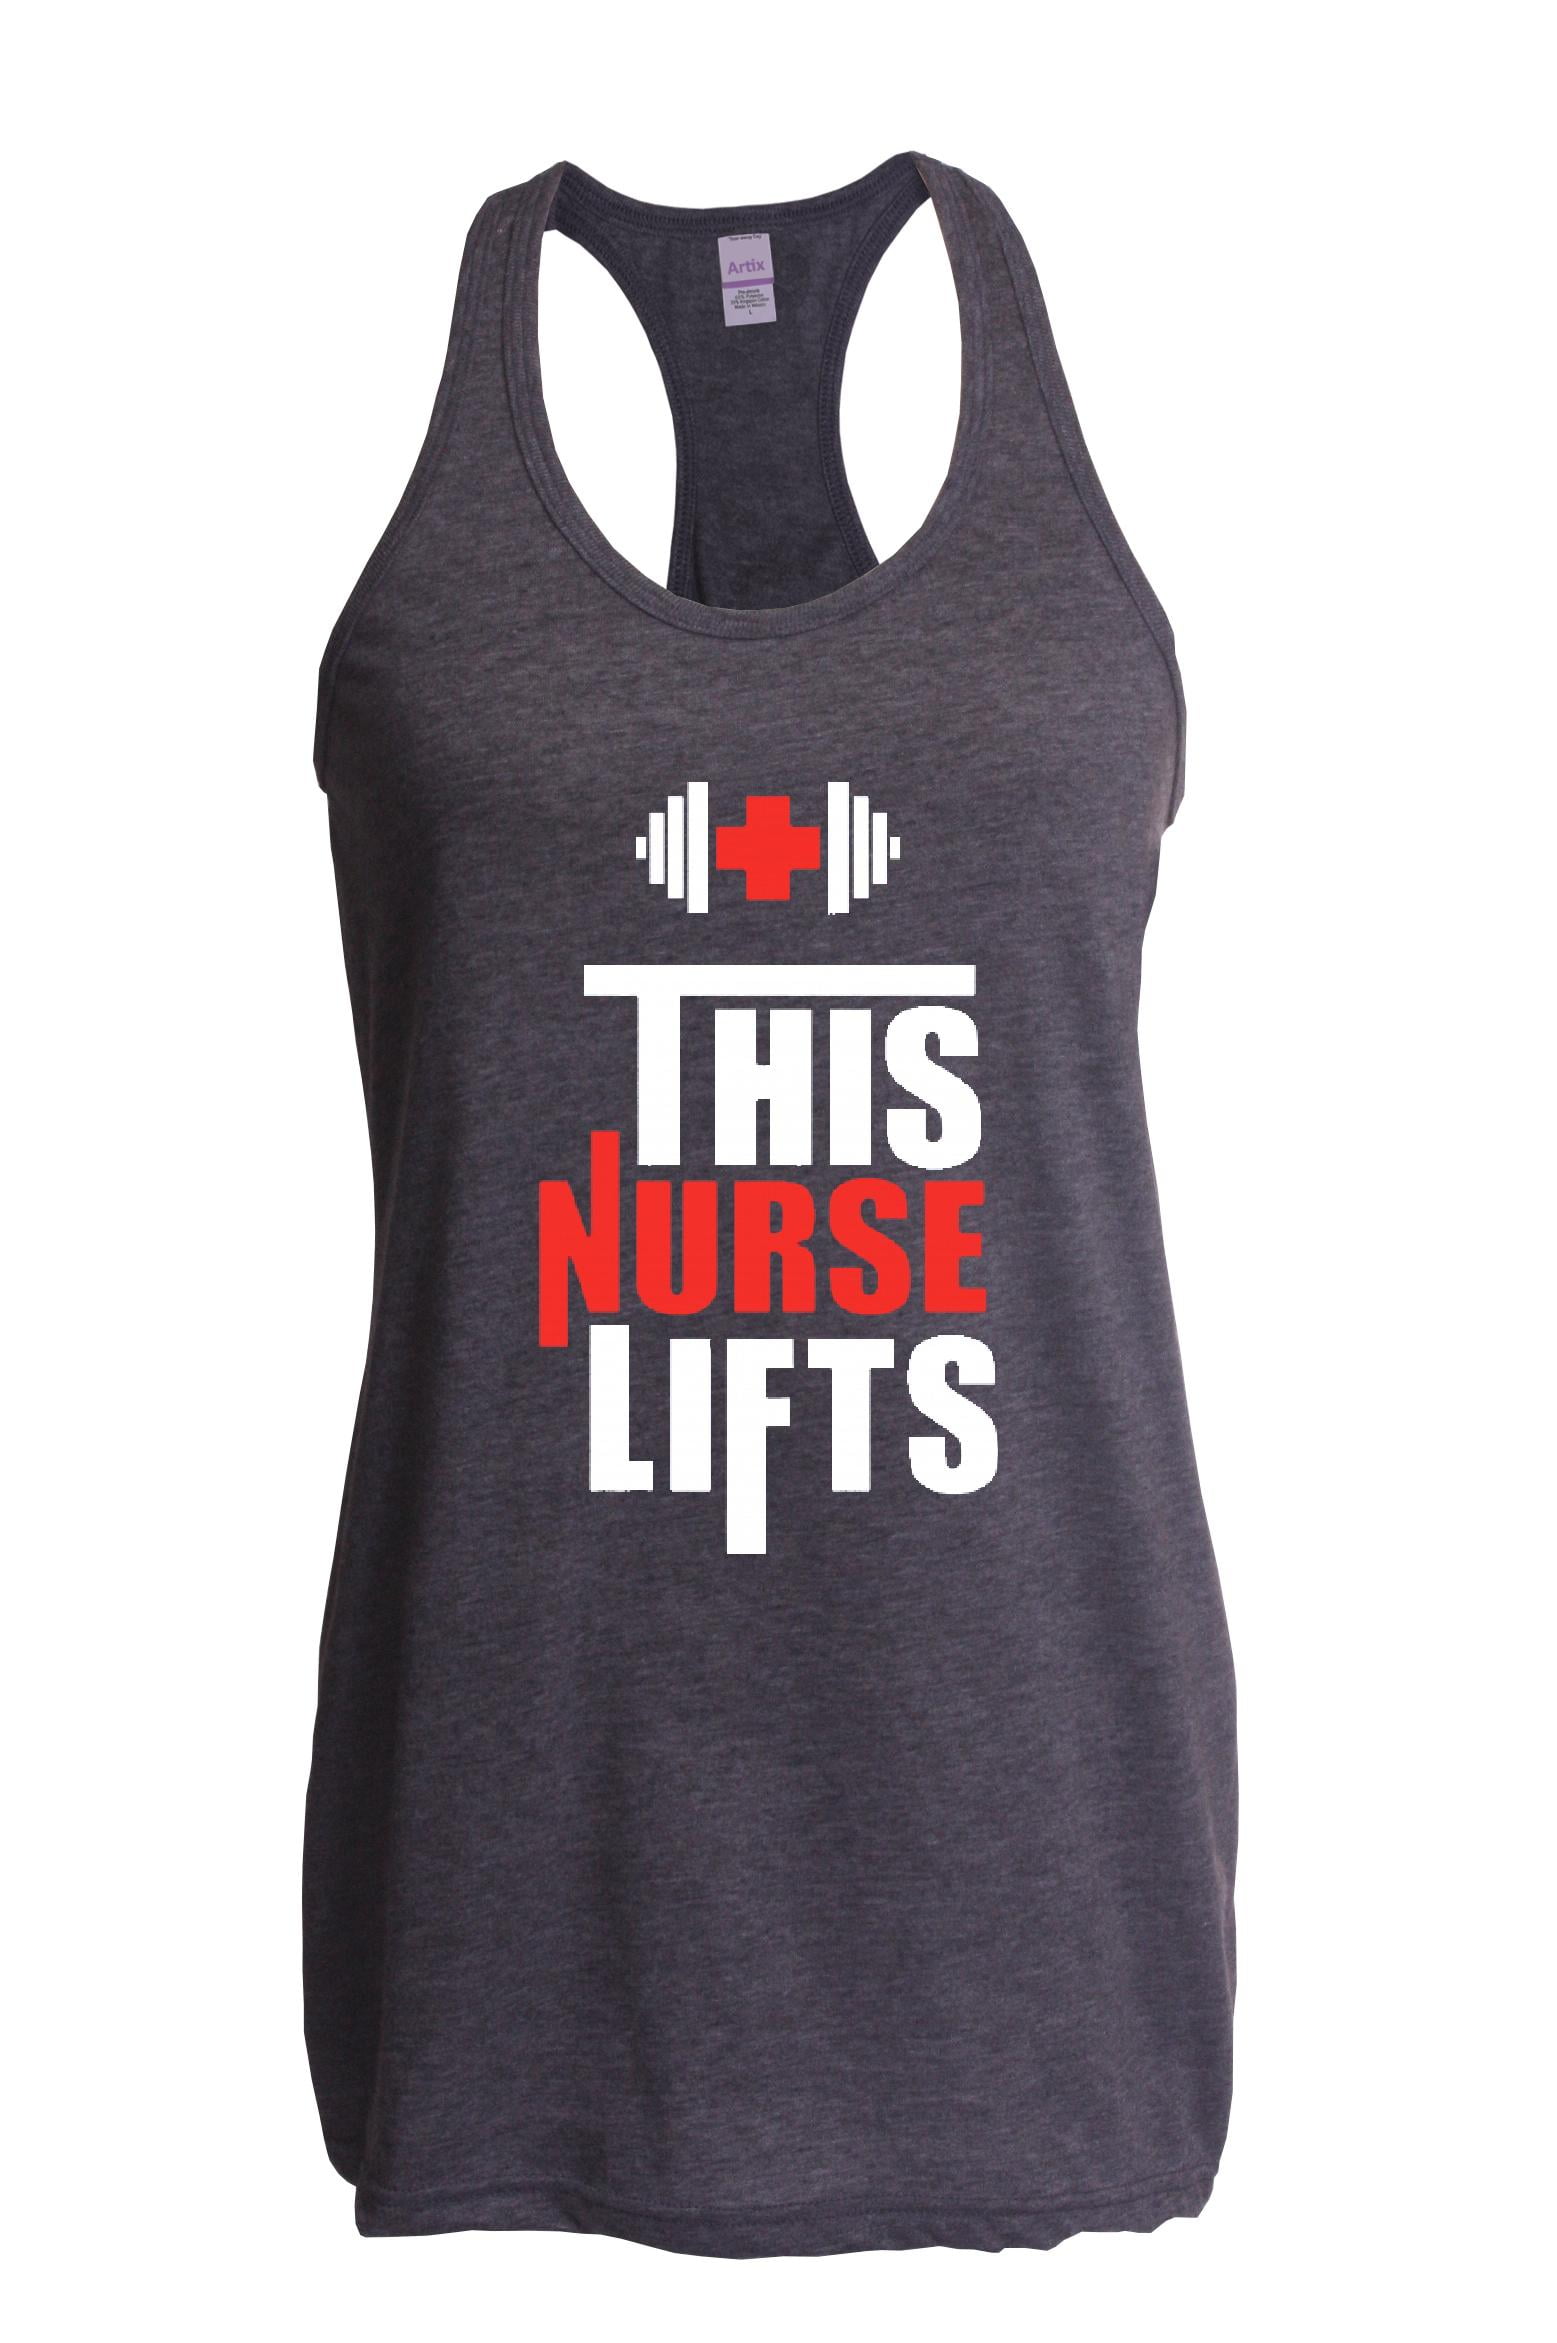 Womens This NURSE Lifts Crossfit GYM Fitness Casual Tank Vest Sleveless Tops 